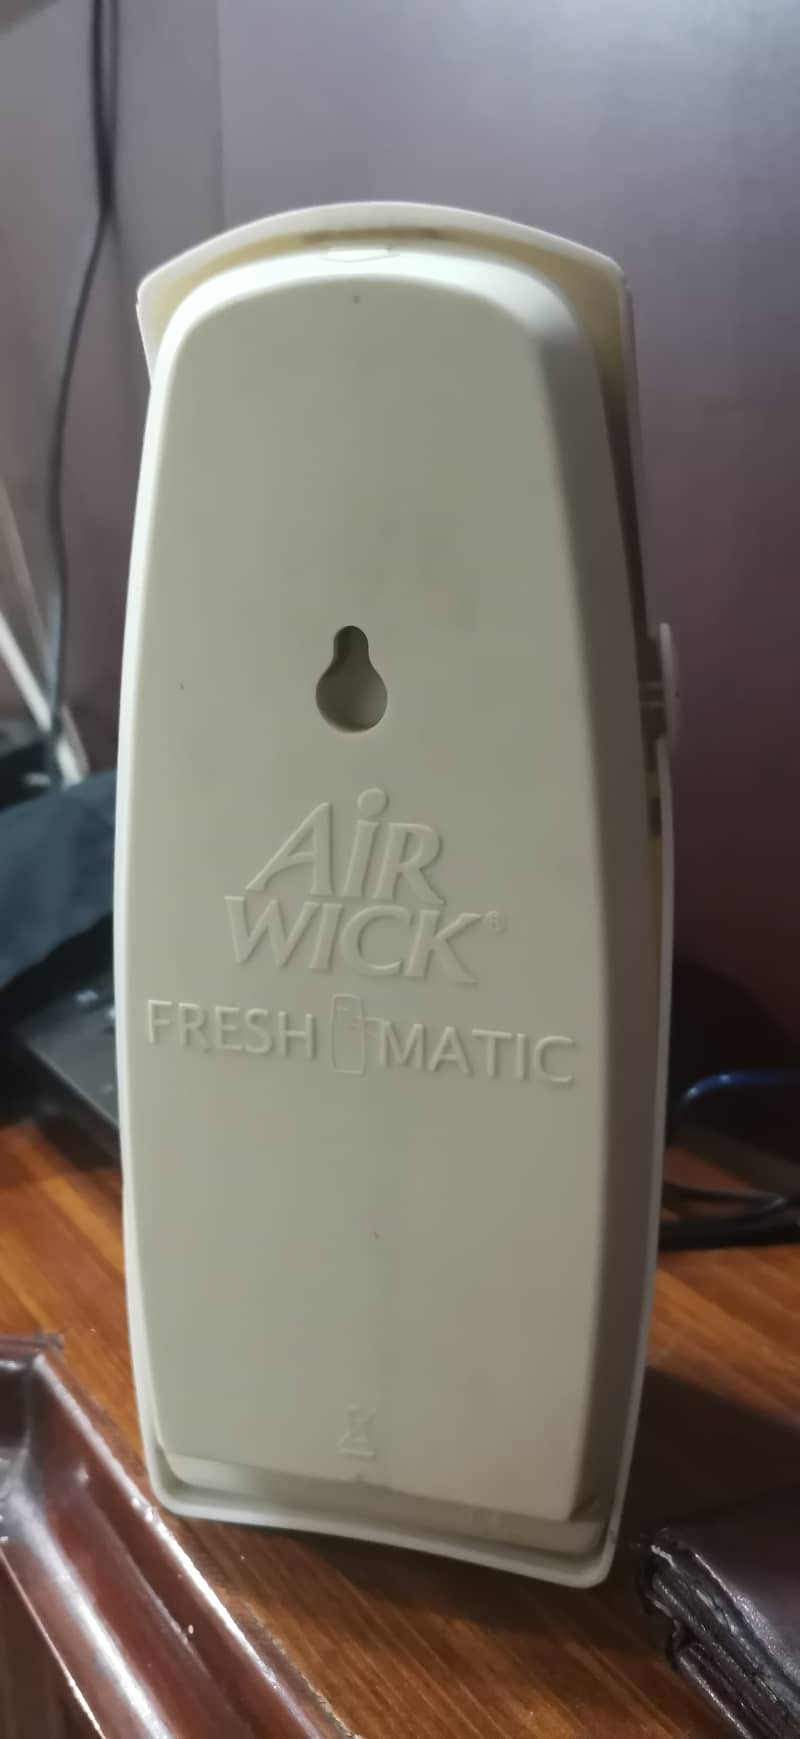 AirWick Freshmatic Automatic Spray Home Fragrance bought from Dubai 1